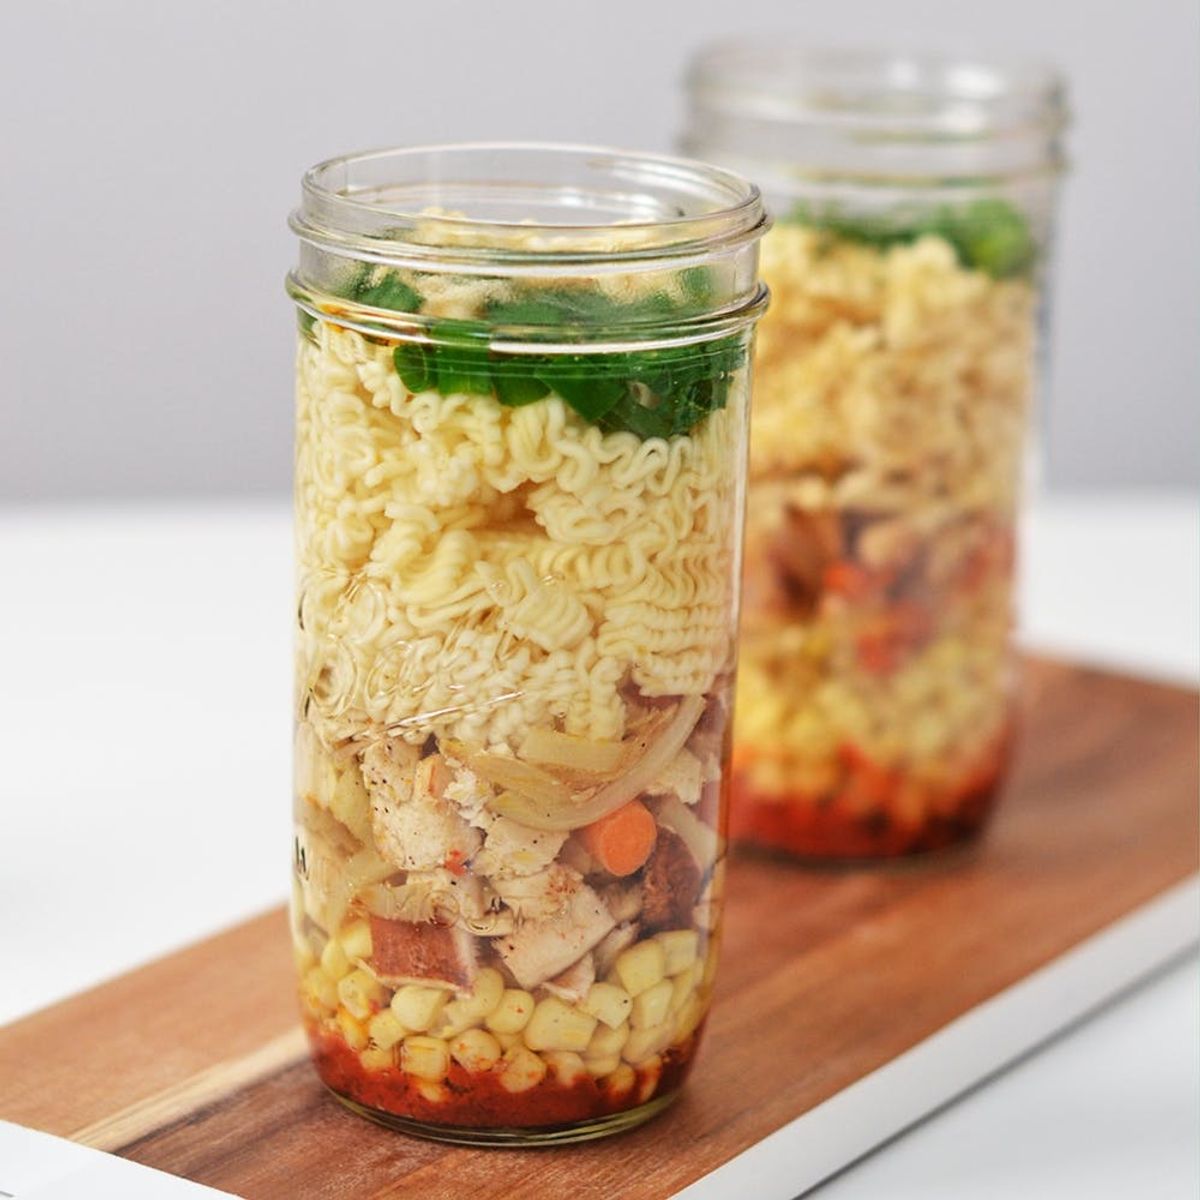 Sorry Cup O’ Noodles: This Homemade Ramen Cup Is Our Last-Minute Dinner Pick